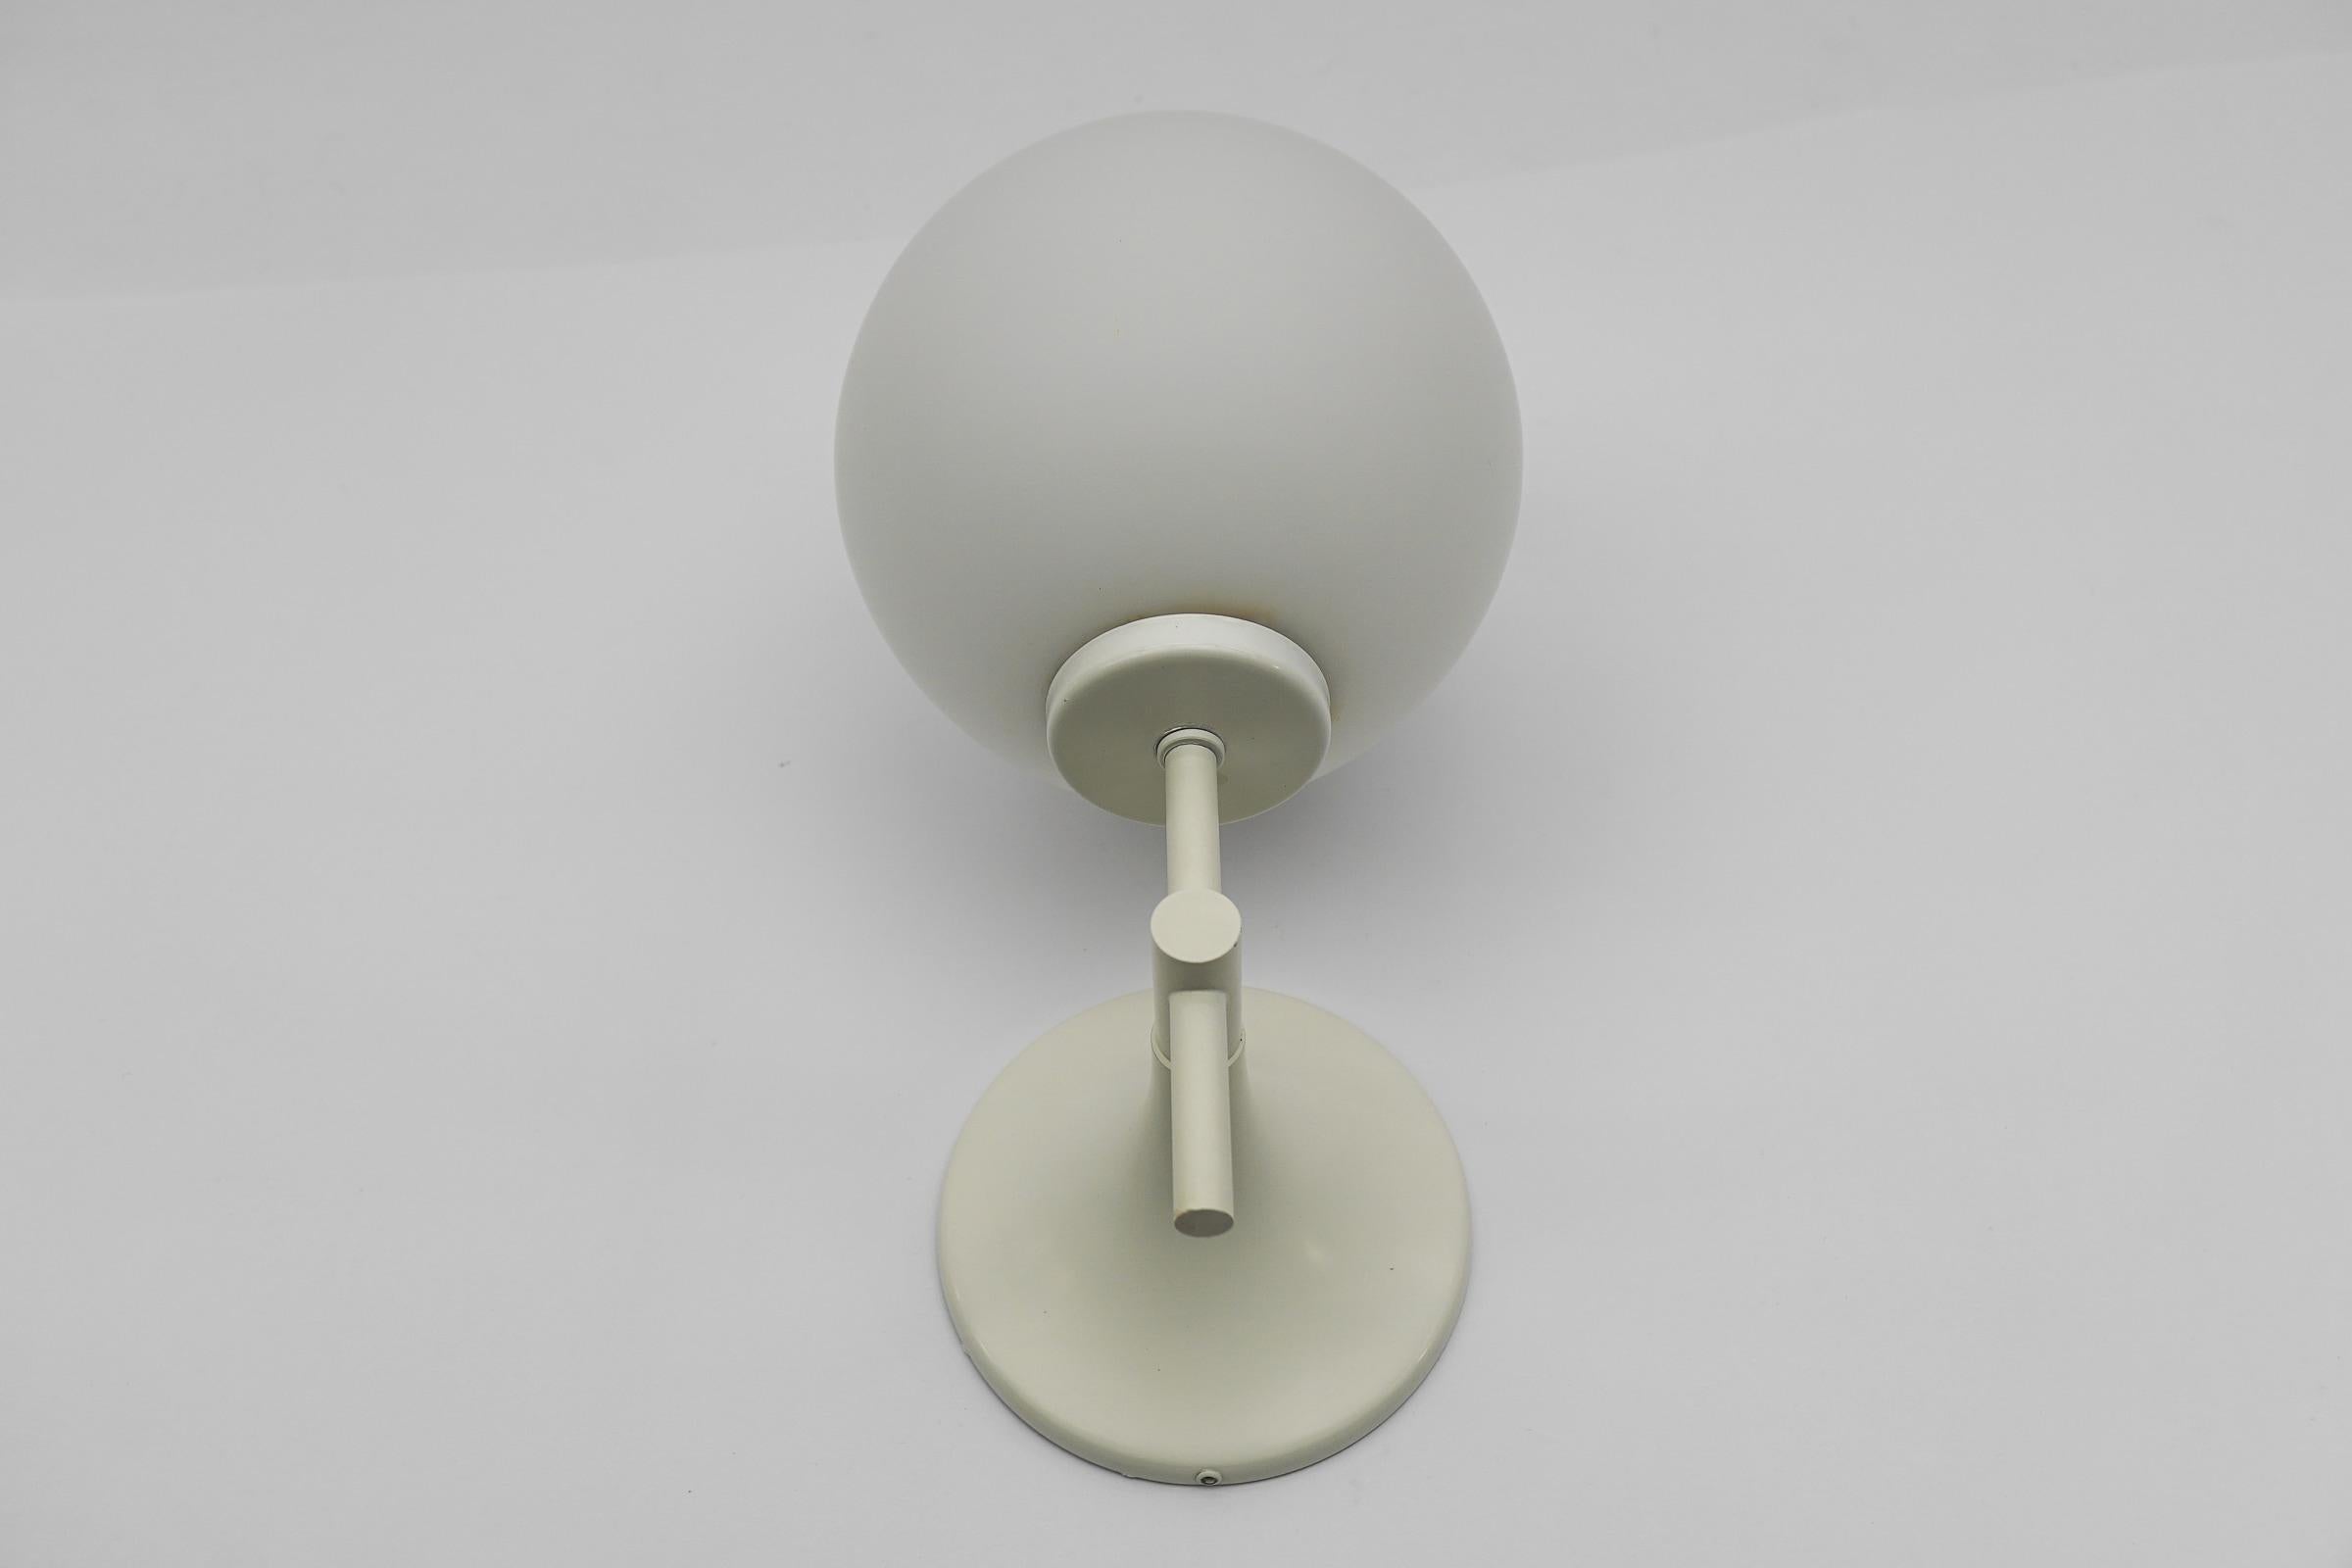 Metal Rare Wall Light in White by Max Bill for Temde, Switzerland, 1960s For Sale